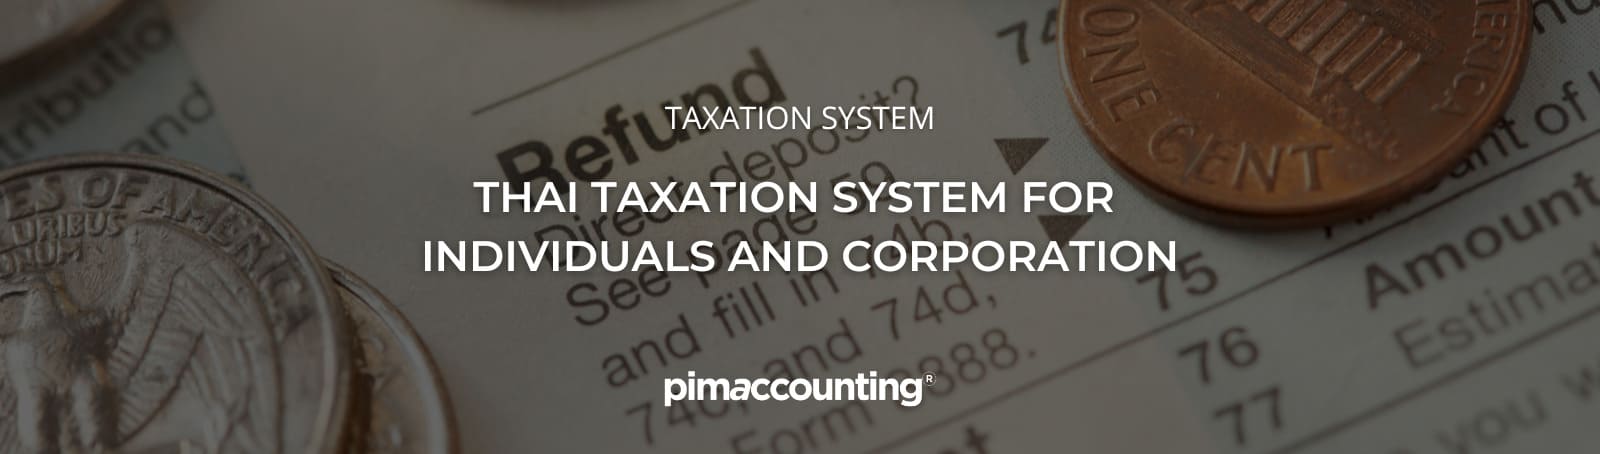 Thai Taxation System for Individuals and Corporations